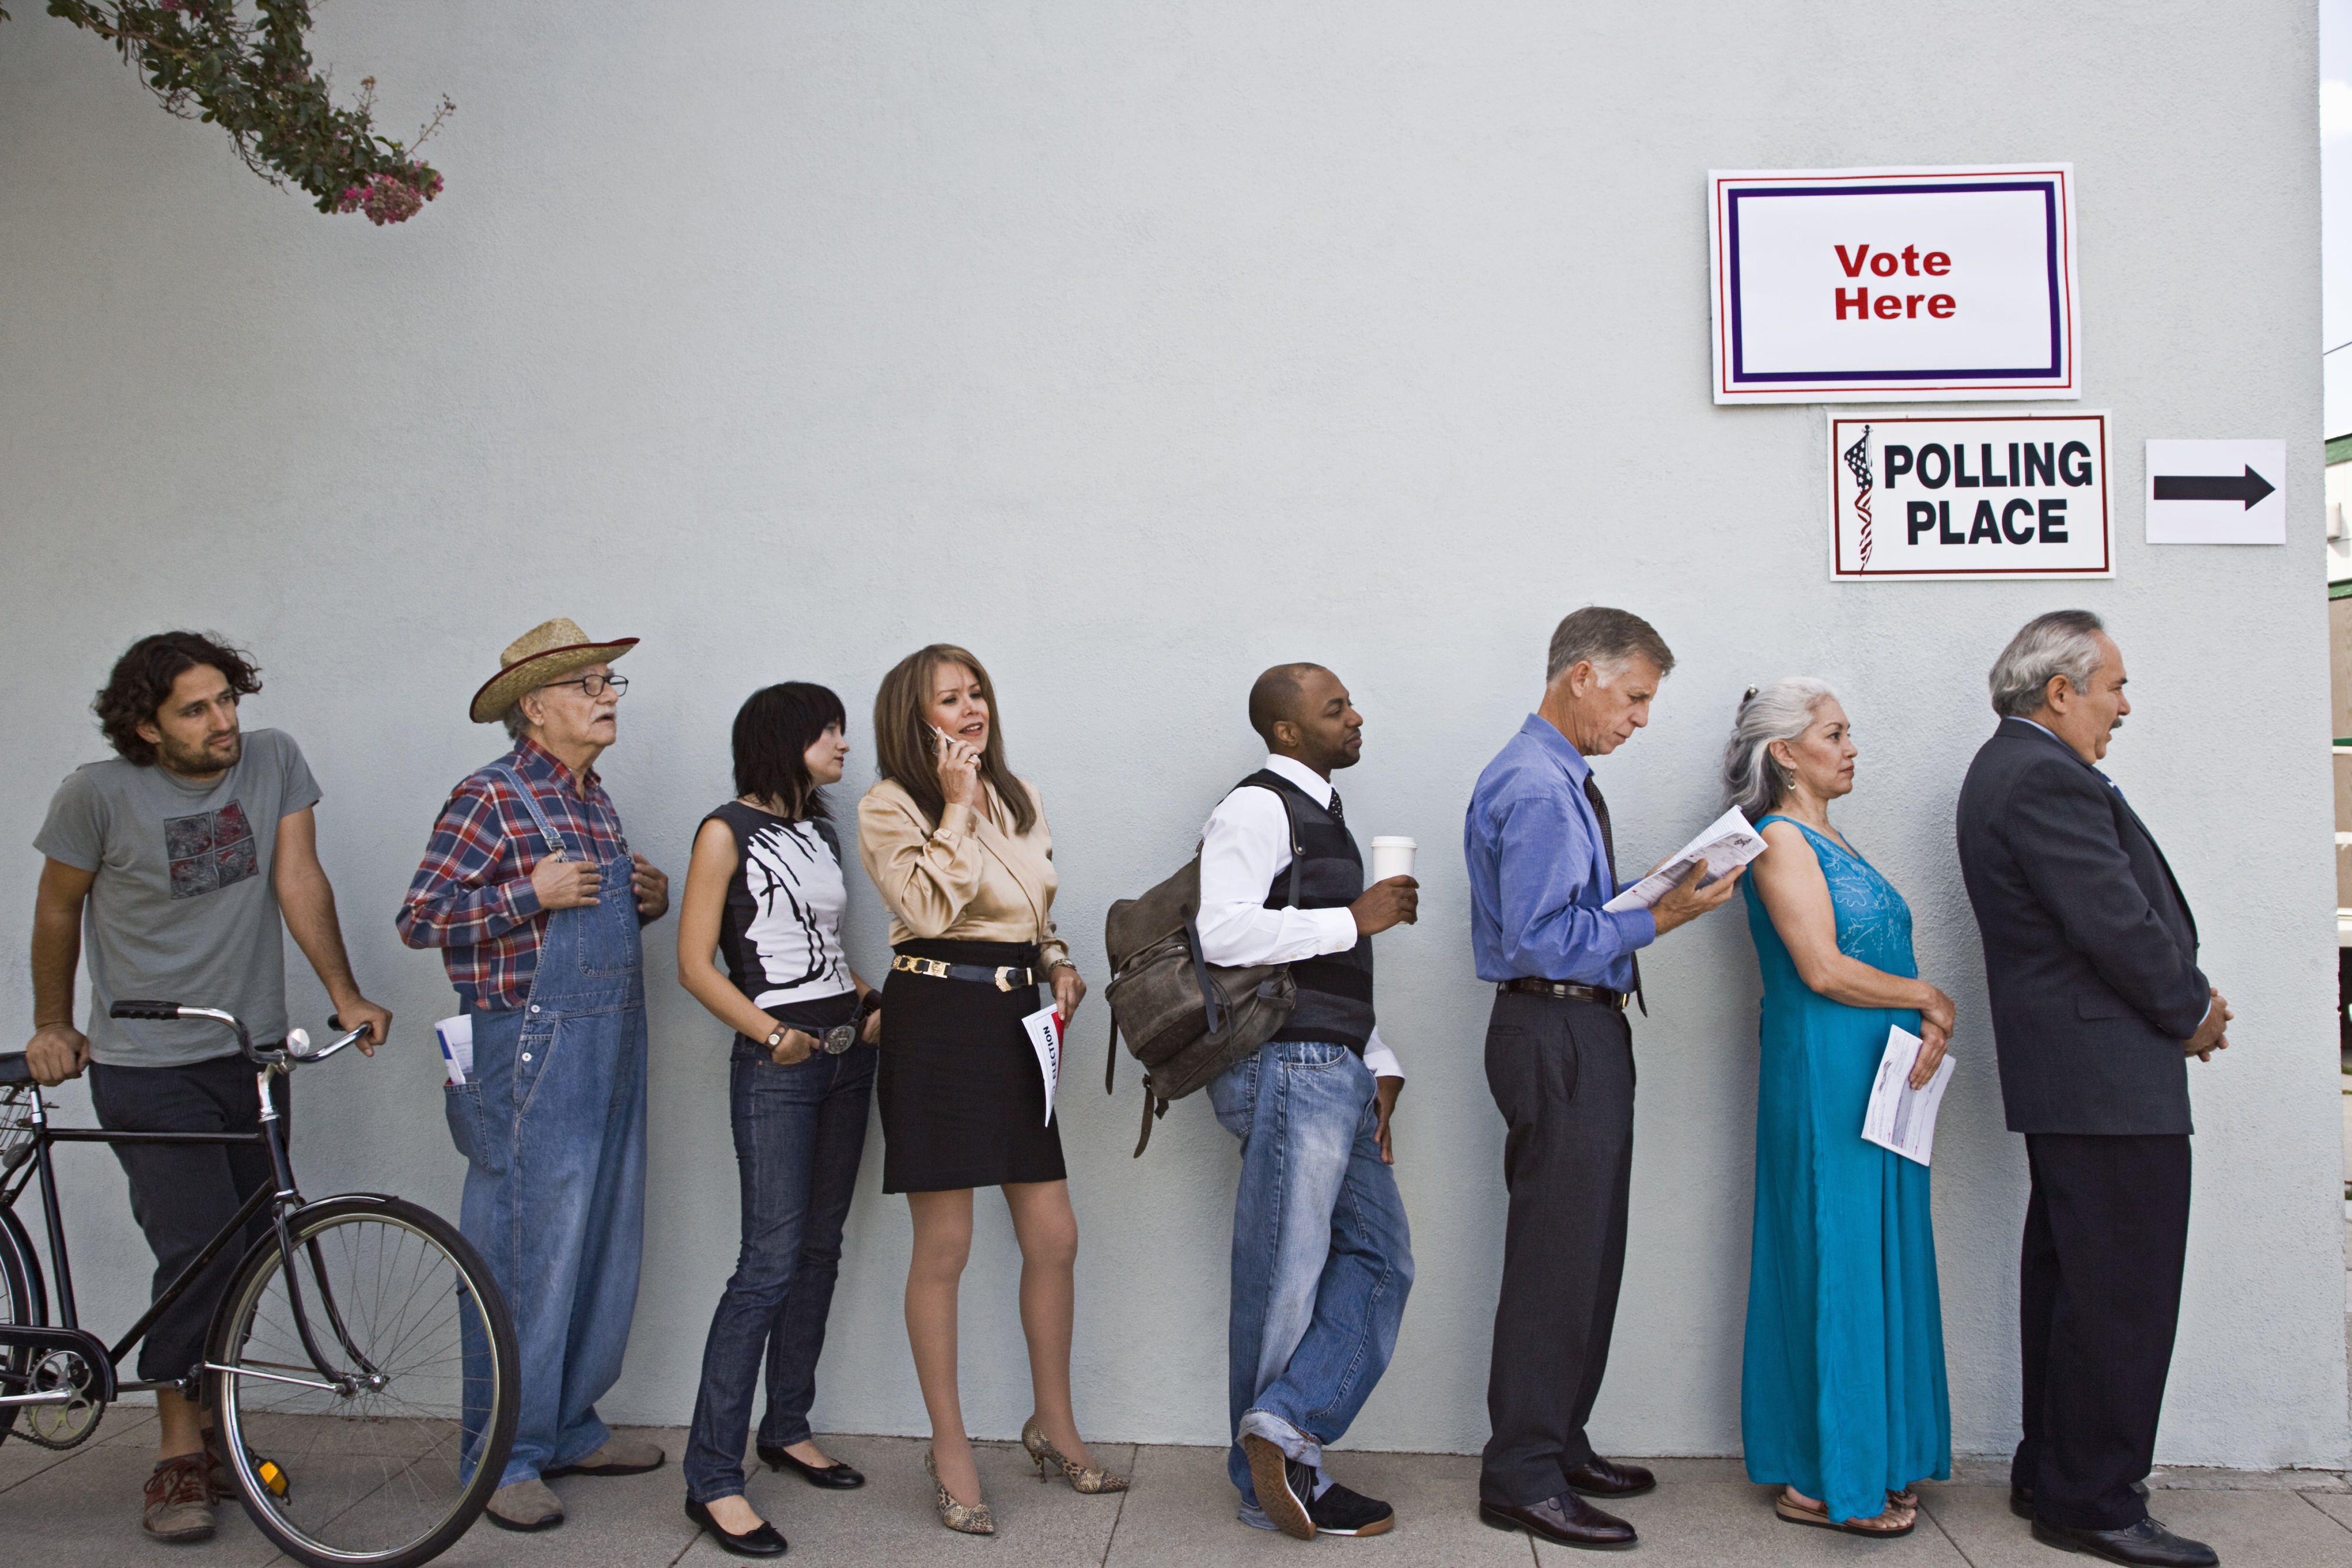 People waiting in line at a polling place